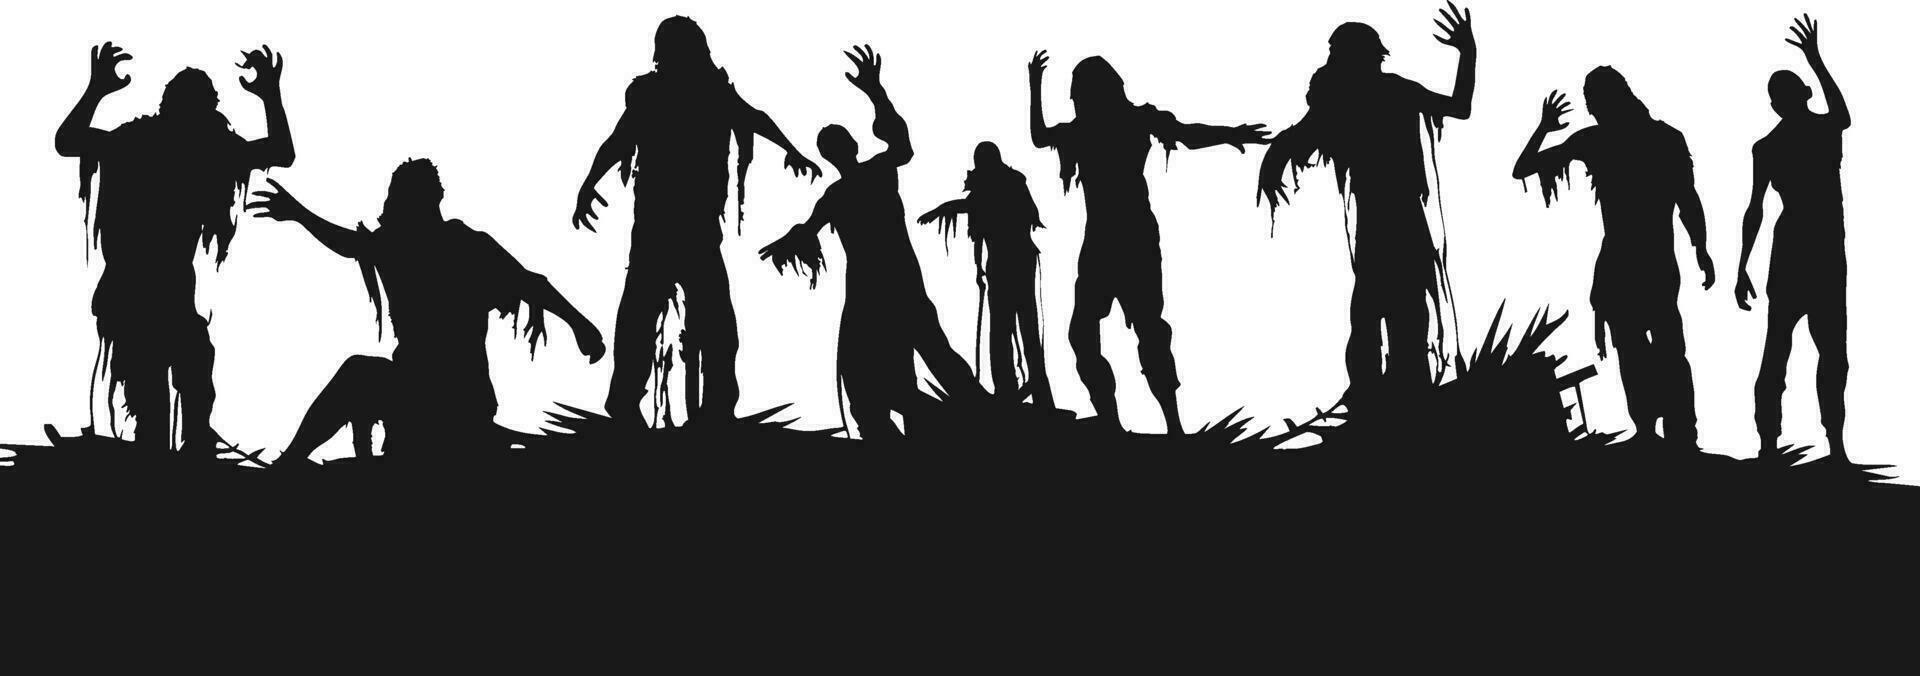 vector a set of zombie silhouettes. vector walking zombies. zombies with their shadows vector illustration on white background.